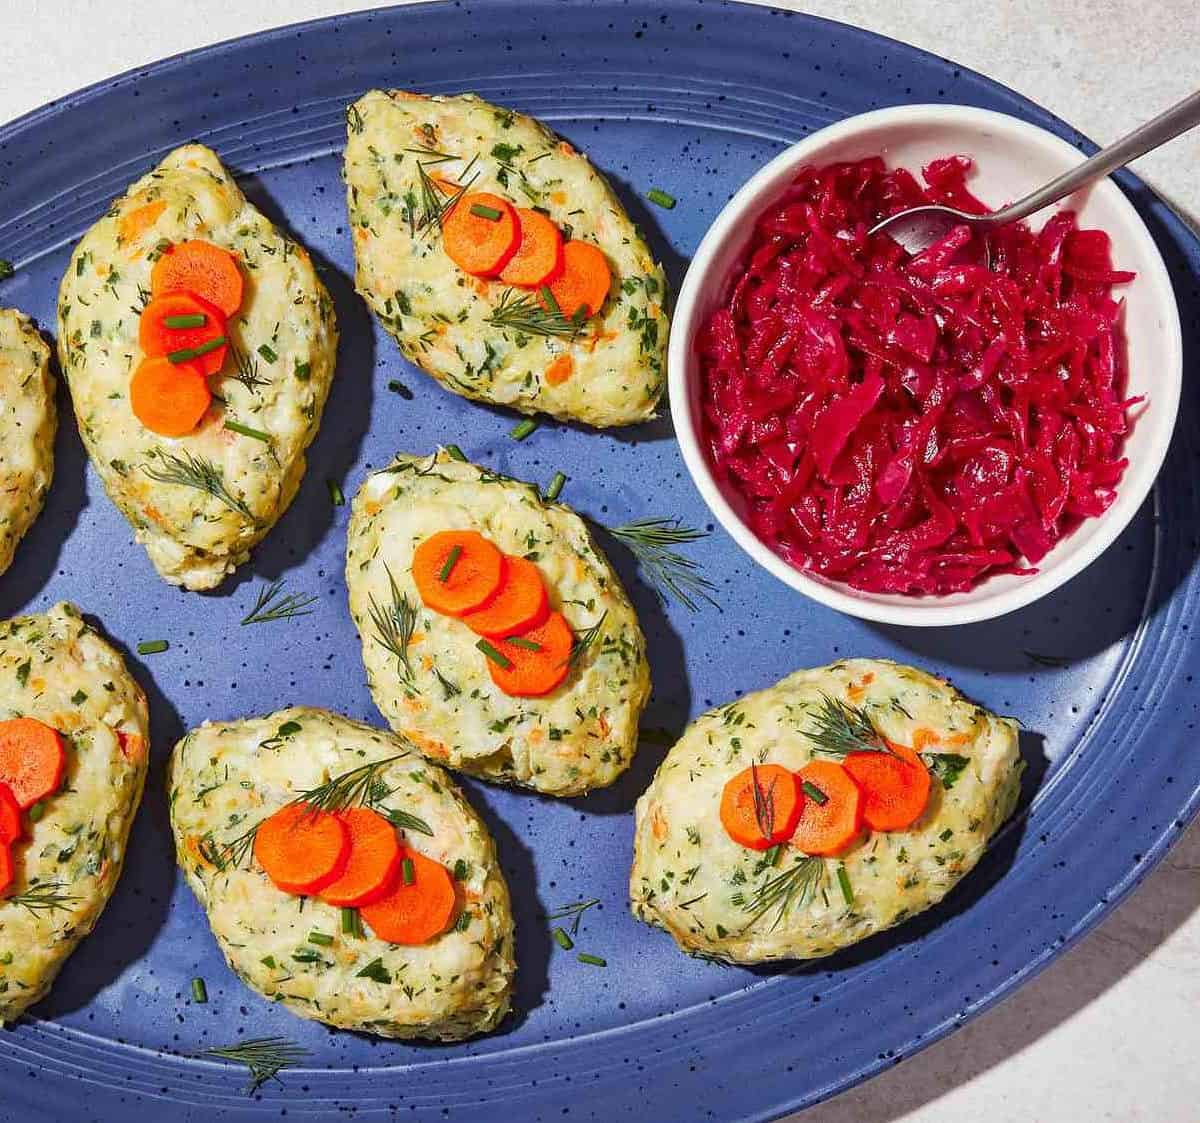  A mouthwatering platter of homemade Gefilte Fish, perfect for any celebration!